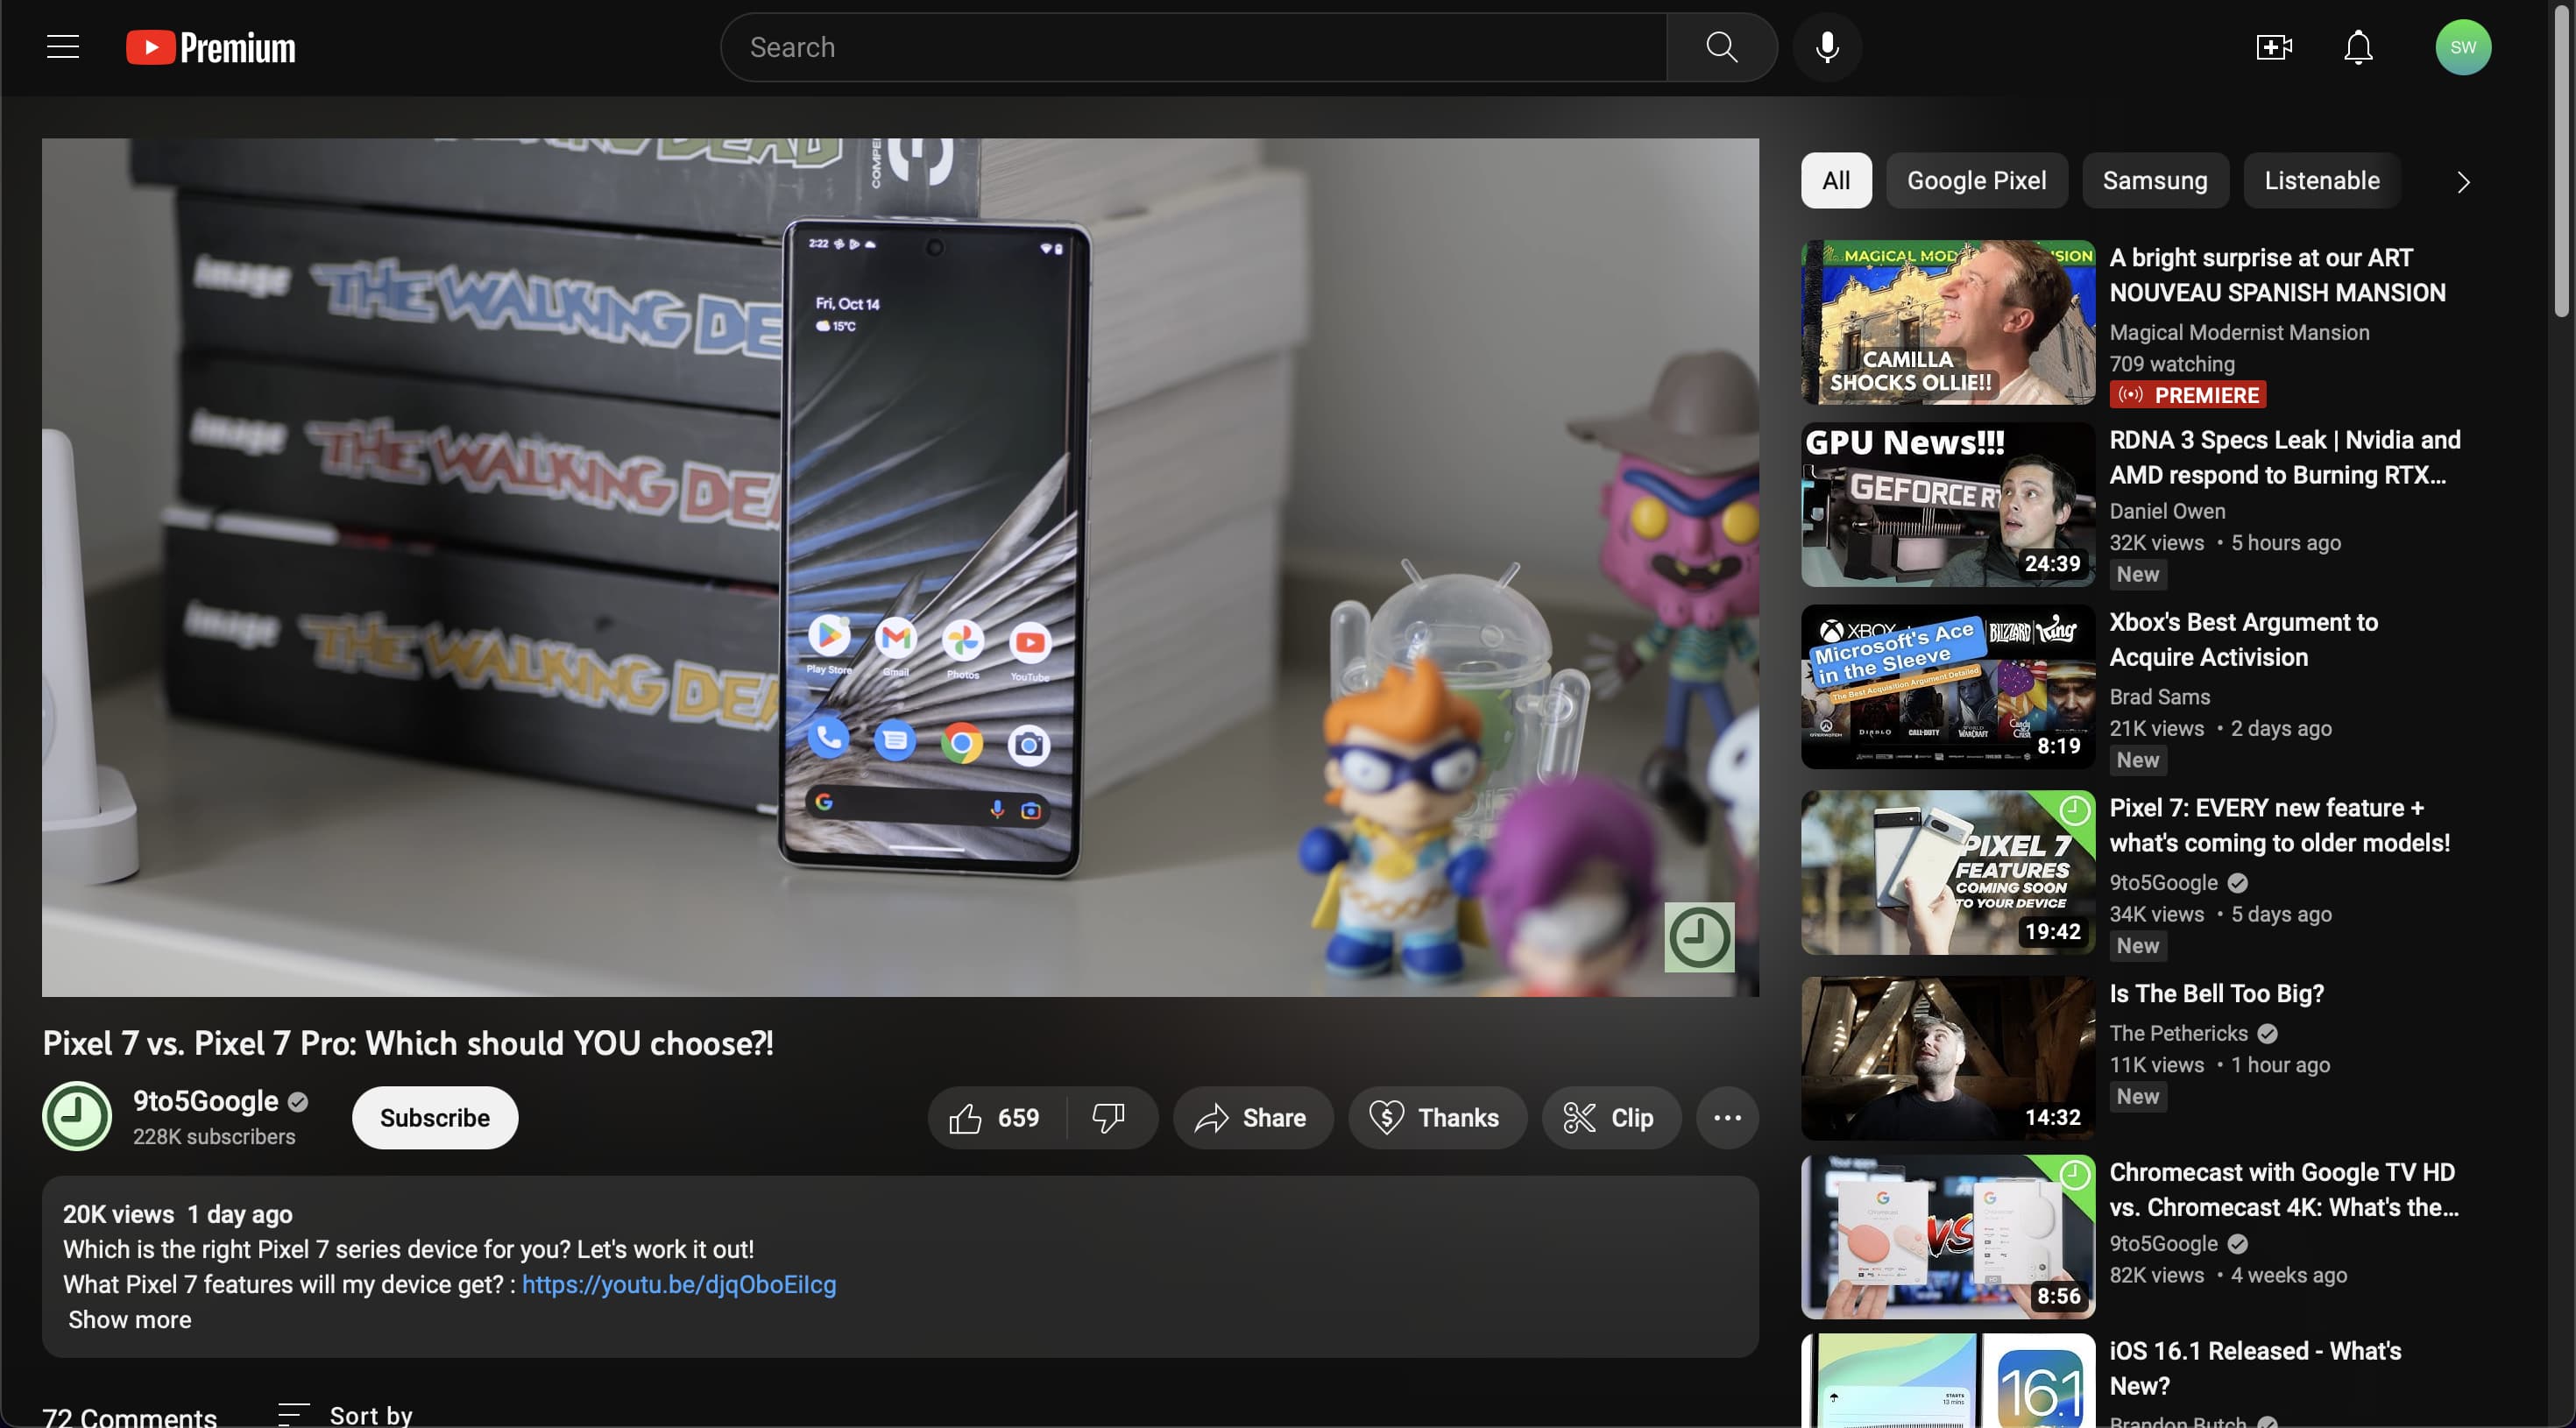 How the new, darker YouTube look compares to the old design